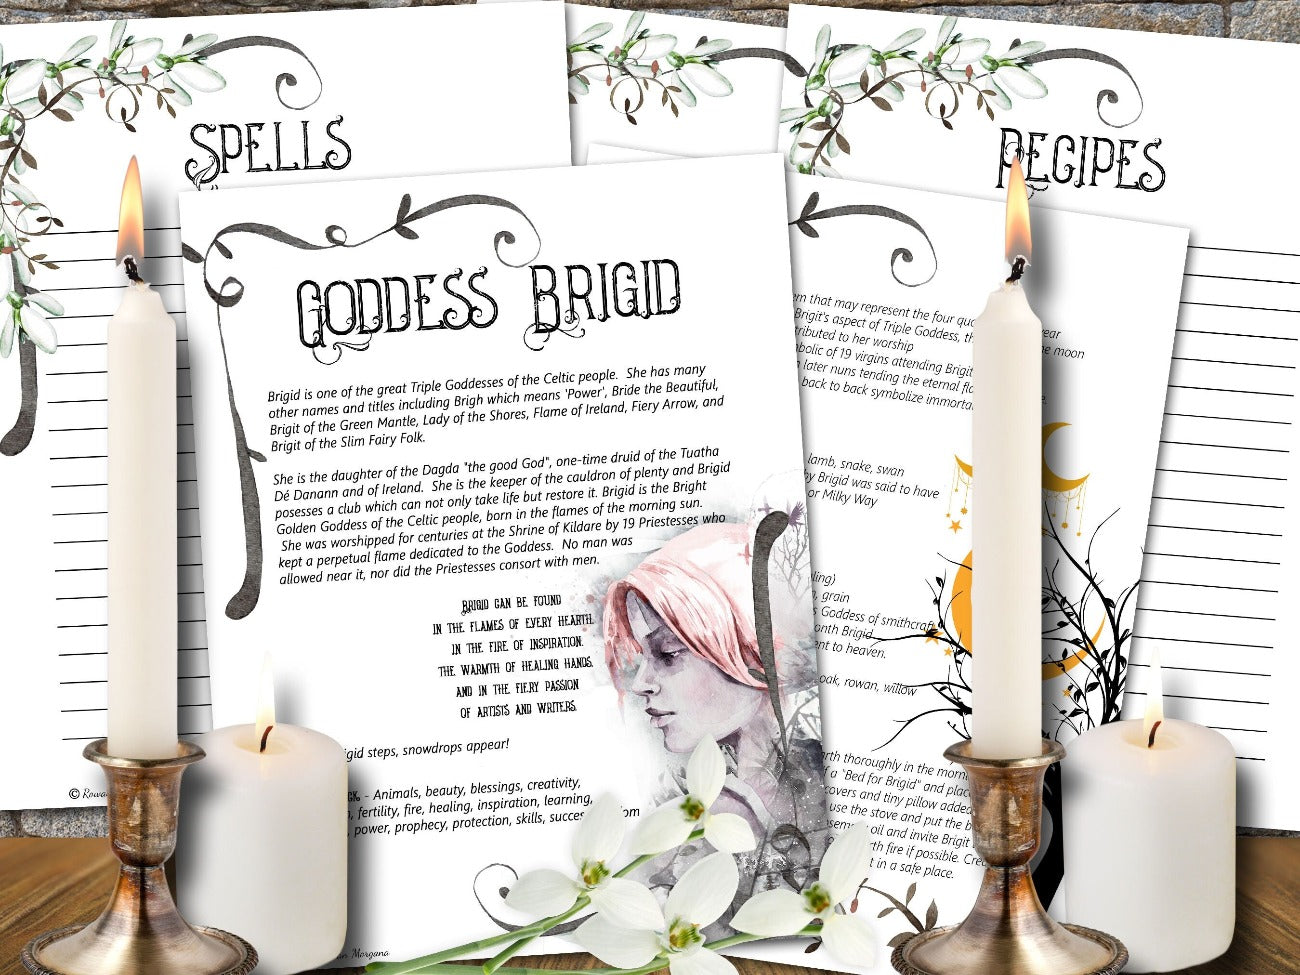 IMBOLC BUNDLE, Goddess Brigid 2 pages, and Blank Lined spells and recipes pages - Morgana Magick Spell